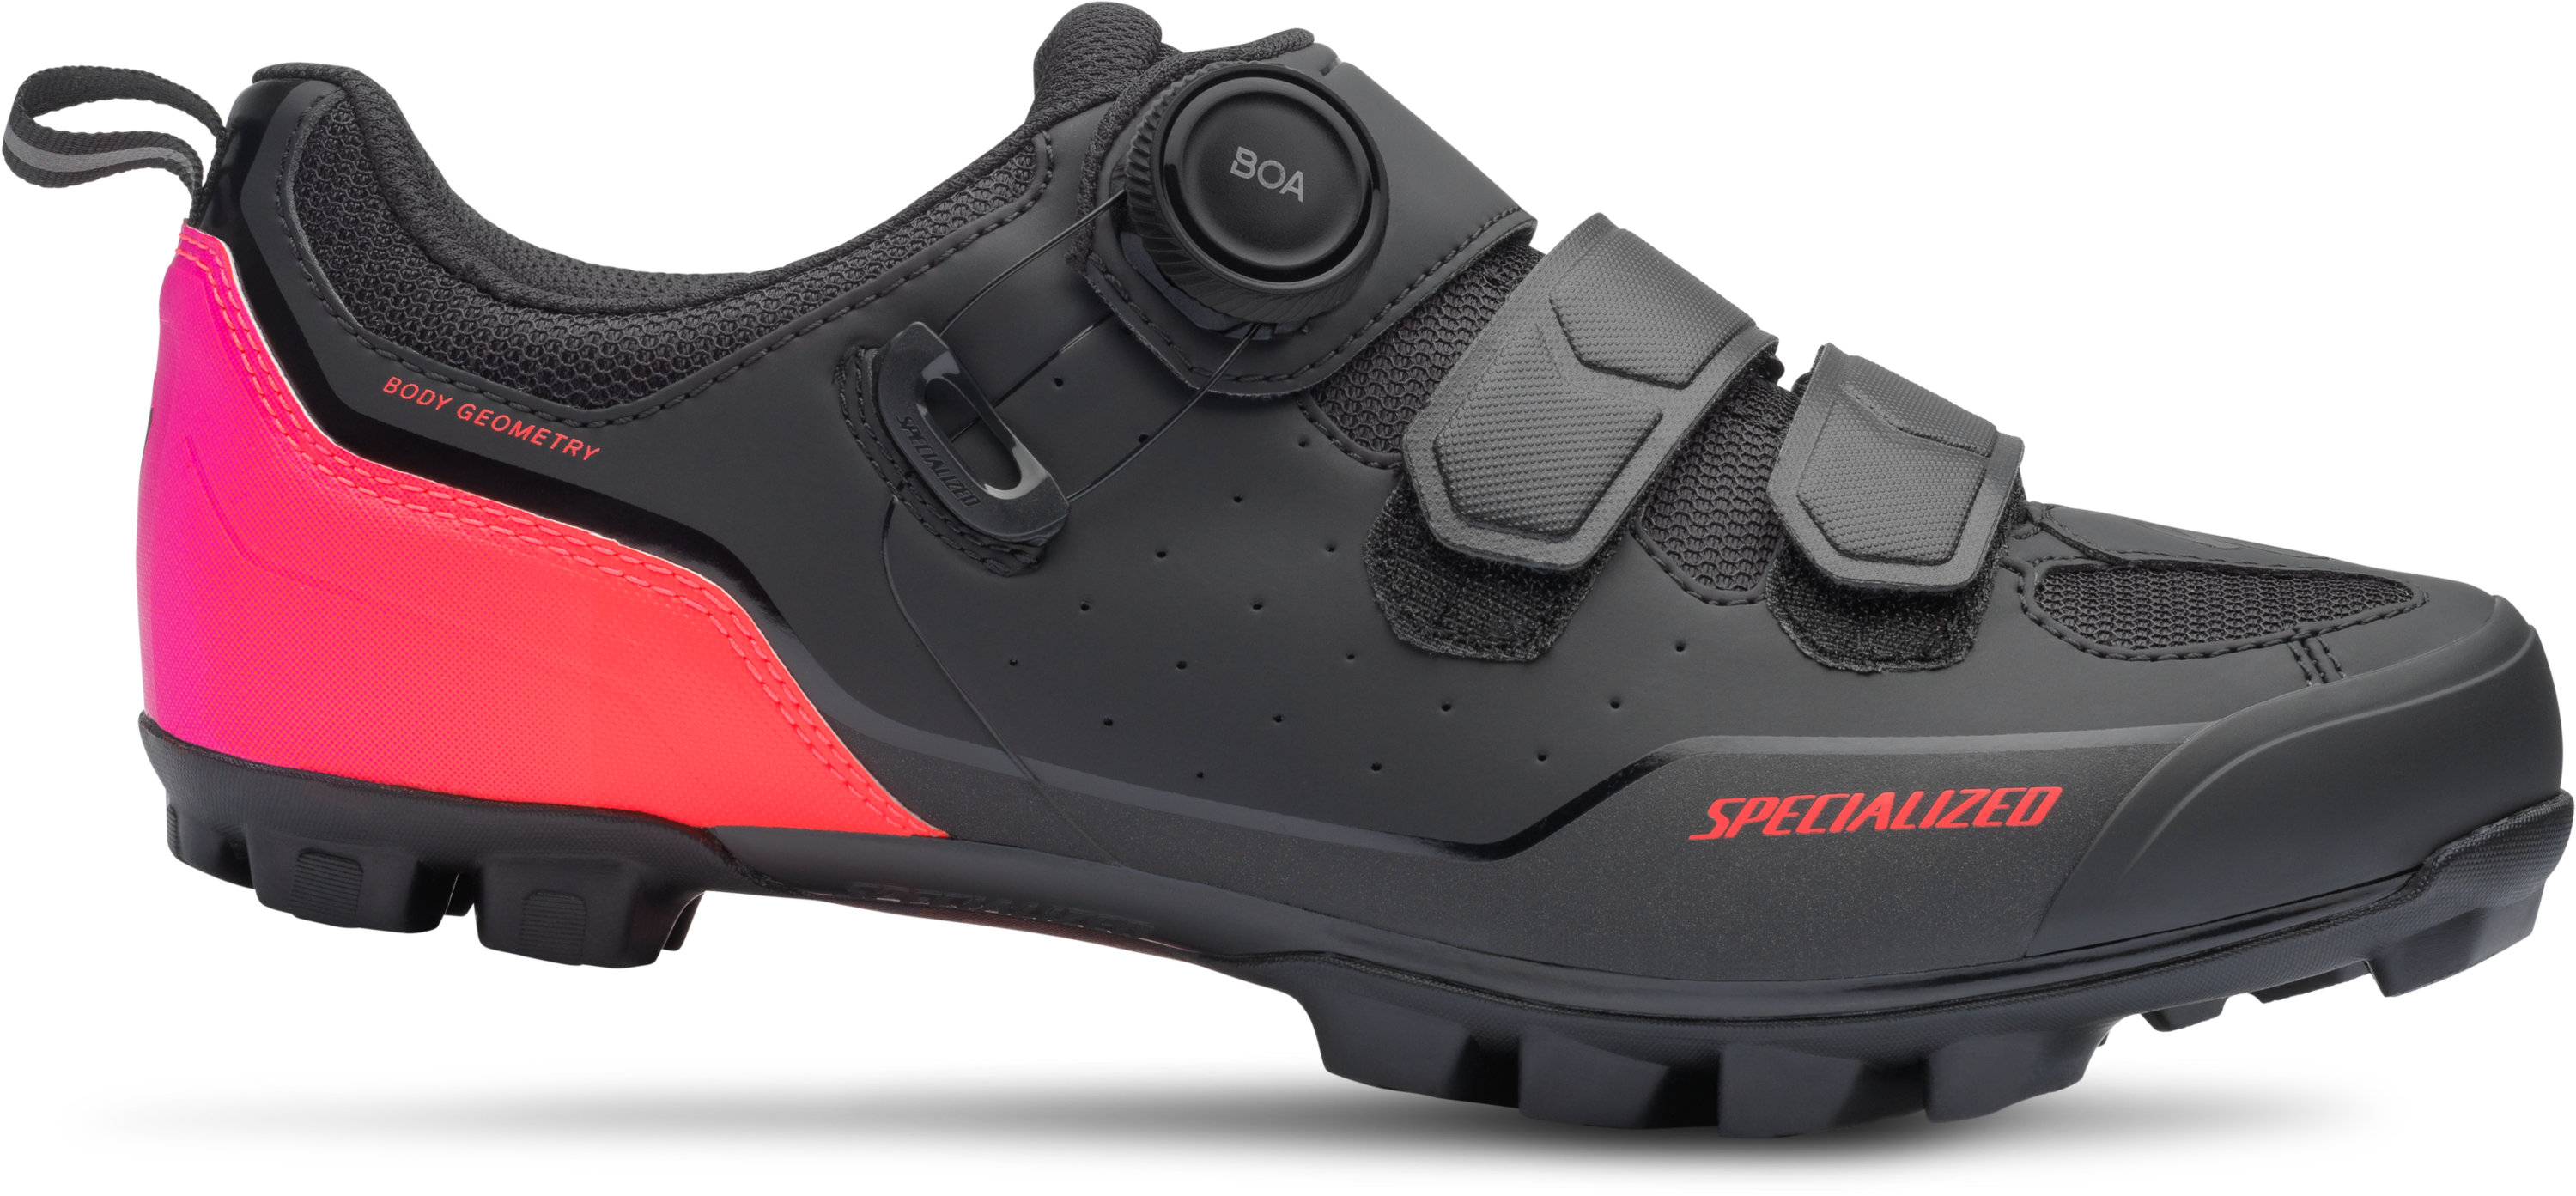 specialized comp mtb shoes 2020